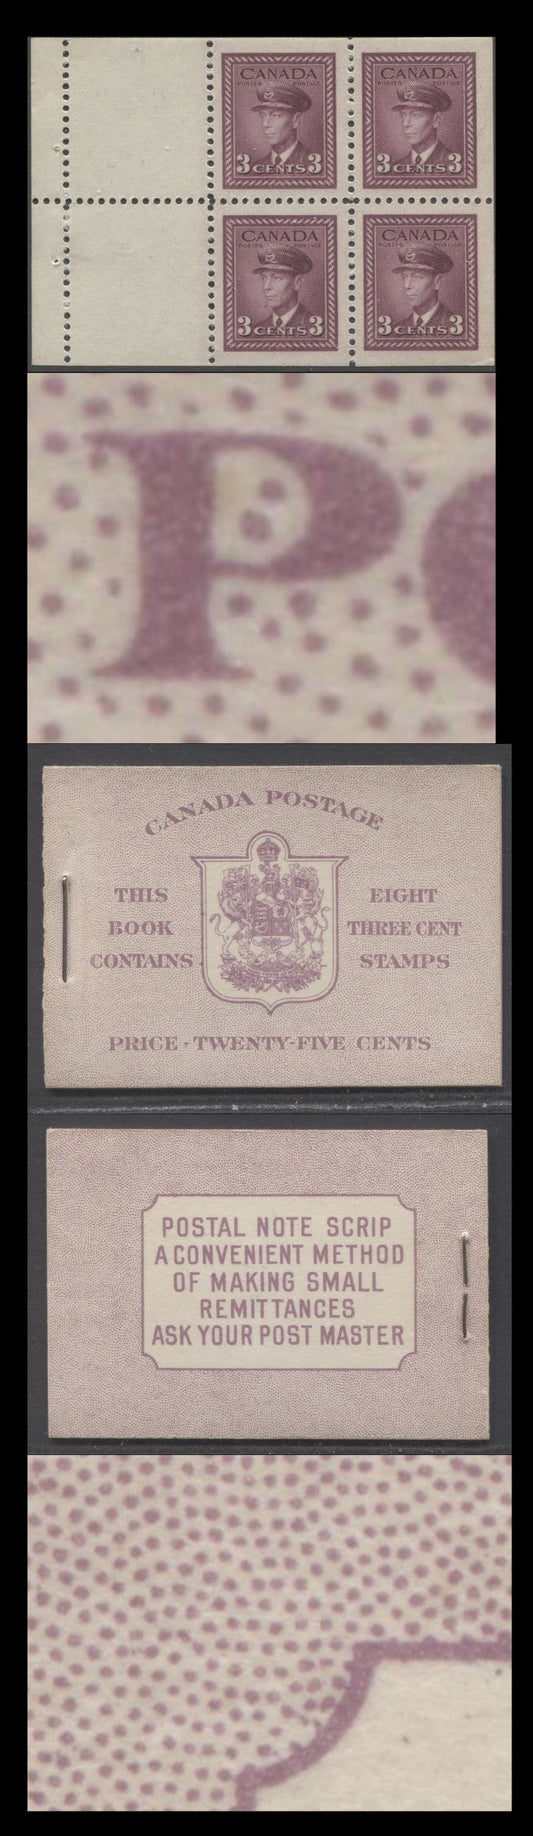 Lot 82 Canada #BK35cE 1942-1947 War Issue, A Complete 25c English Booklet, 2 Panes Of 4+2 Labels 3c Rose Violet, Front Cover IIa, Back Cover Cbiv, Type IIa, 7c & 6c Rates, 'Post Master' Two Words, 1,201,000 Issued